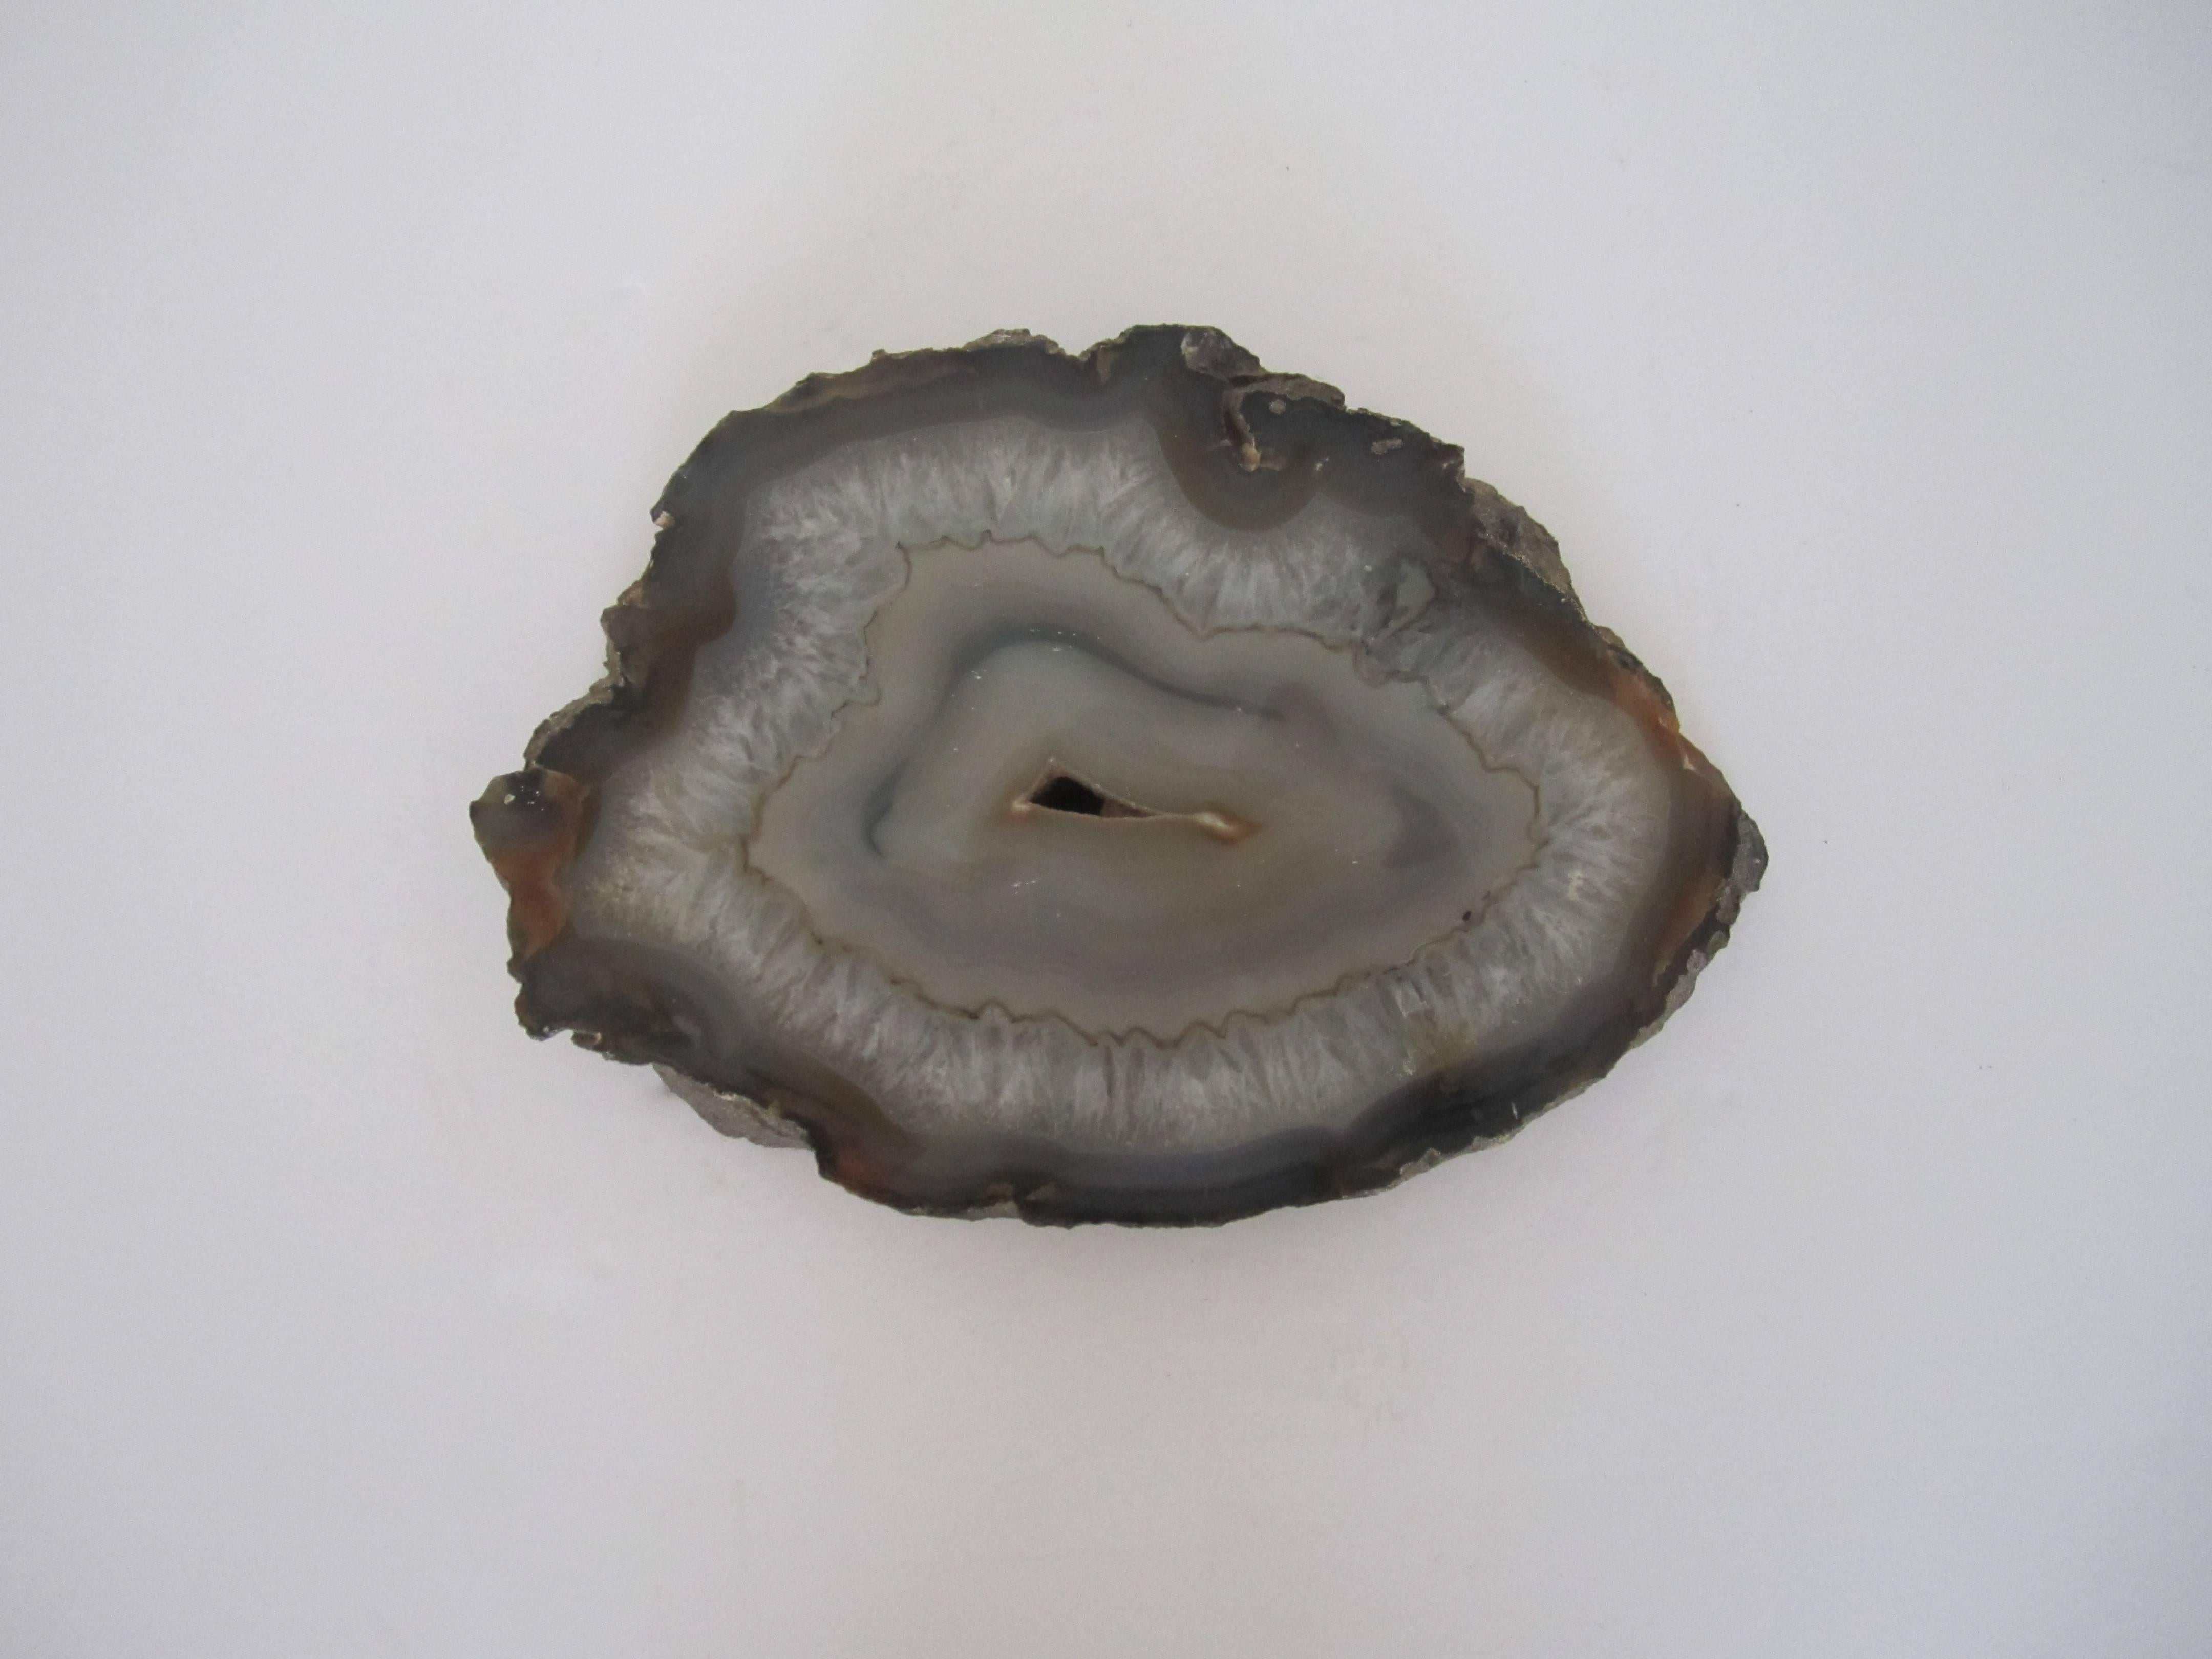 A substantial polished natural agate/geode/onyx decorative object in shades of grey and white. Piece can be used as a decorative piece for a shelf, table, desk, etc., or as a display piece, etc. Measures 7.5